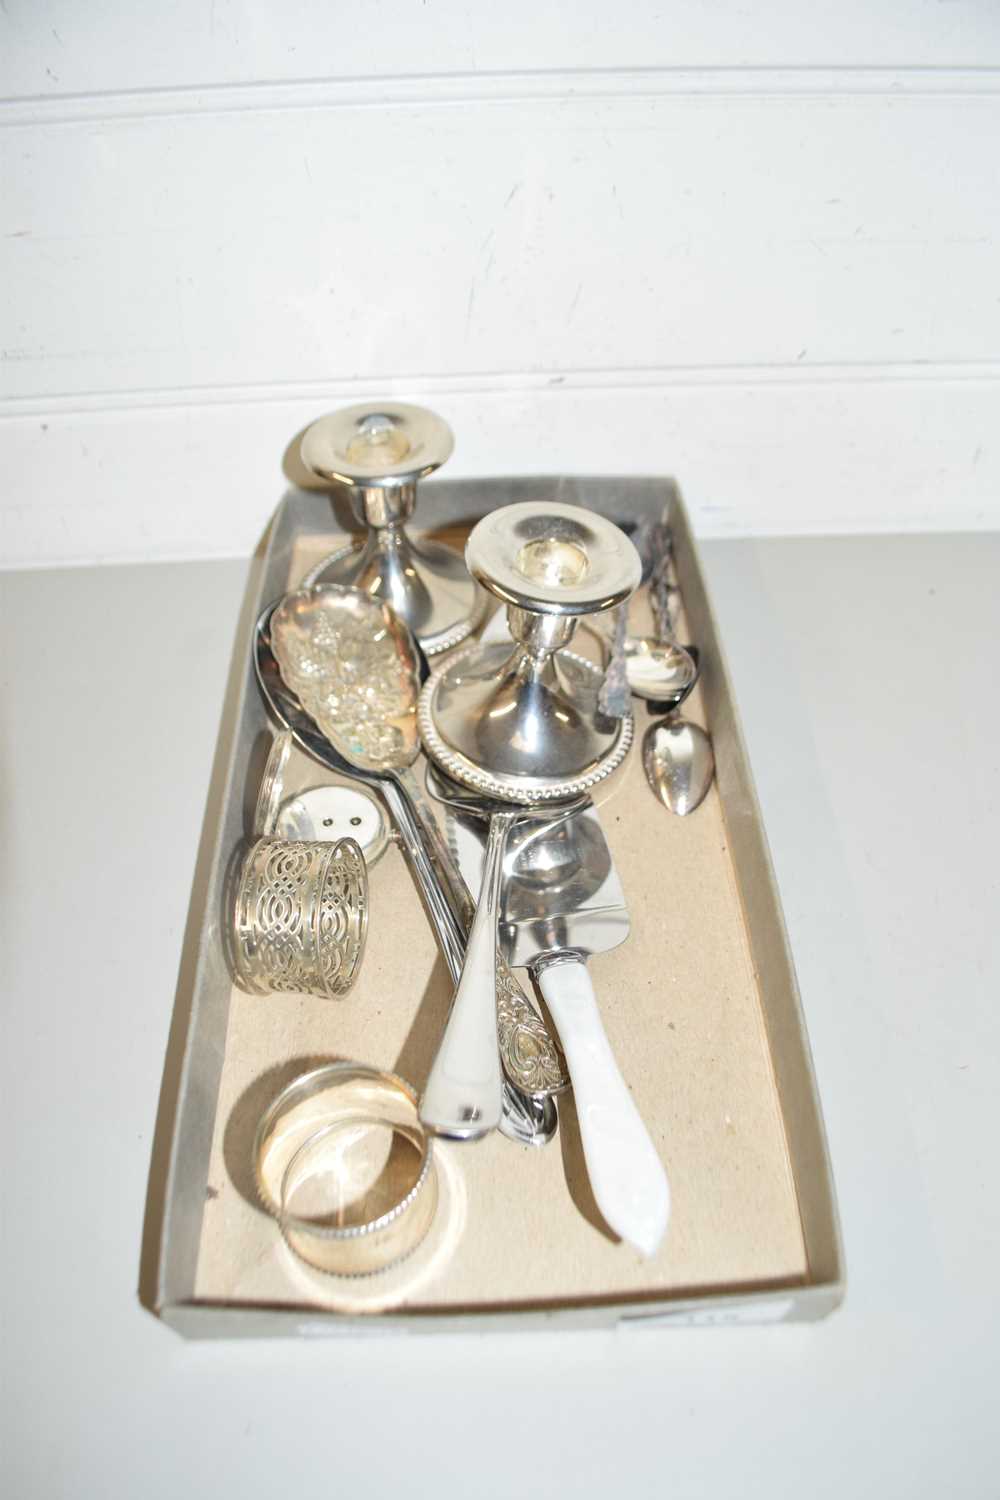 MIXED LOT: SMALL POCKET WATCH, SILVER NAPKIN RING, VARIOUS ASSORTED CUTLERY, CANDLESTICKS ETC